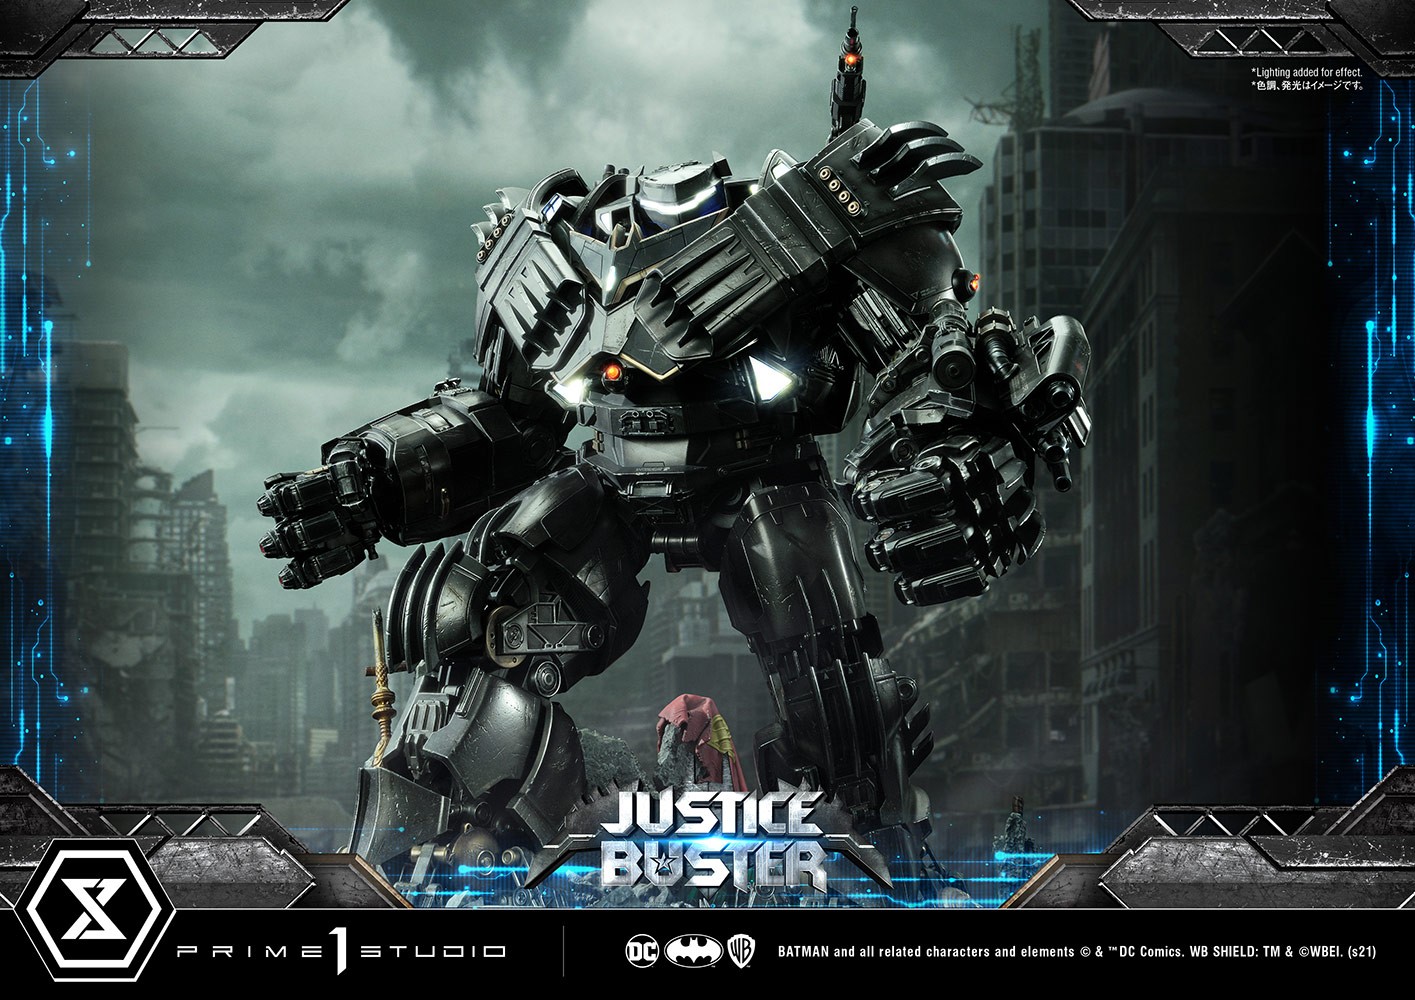 Justice Buster